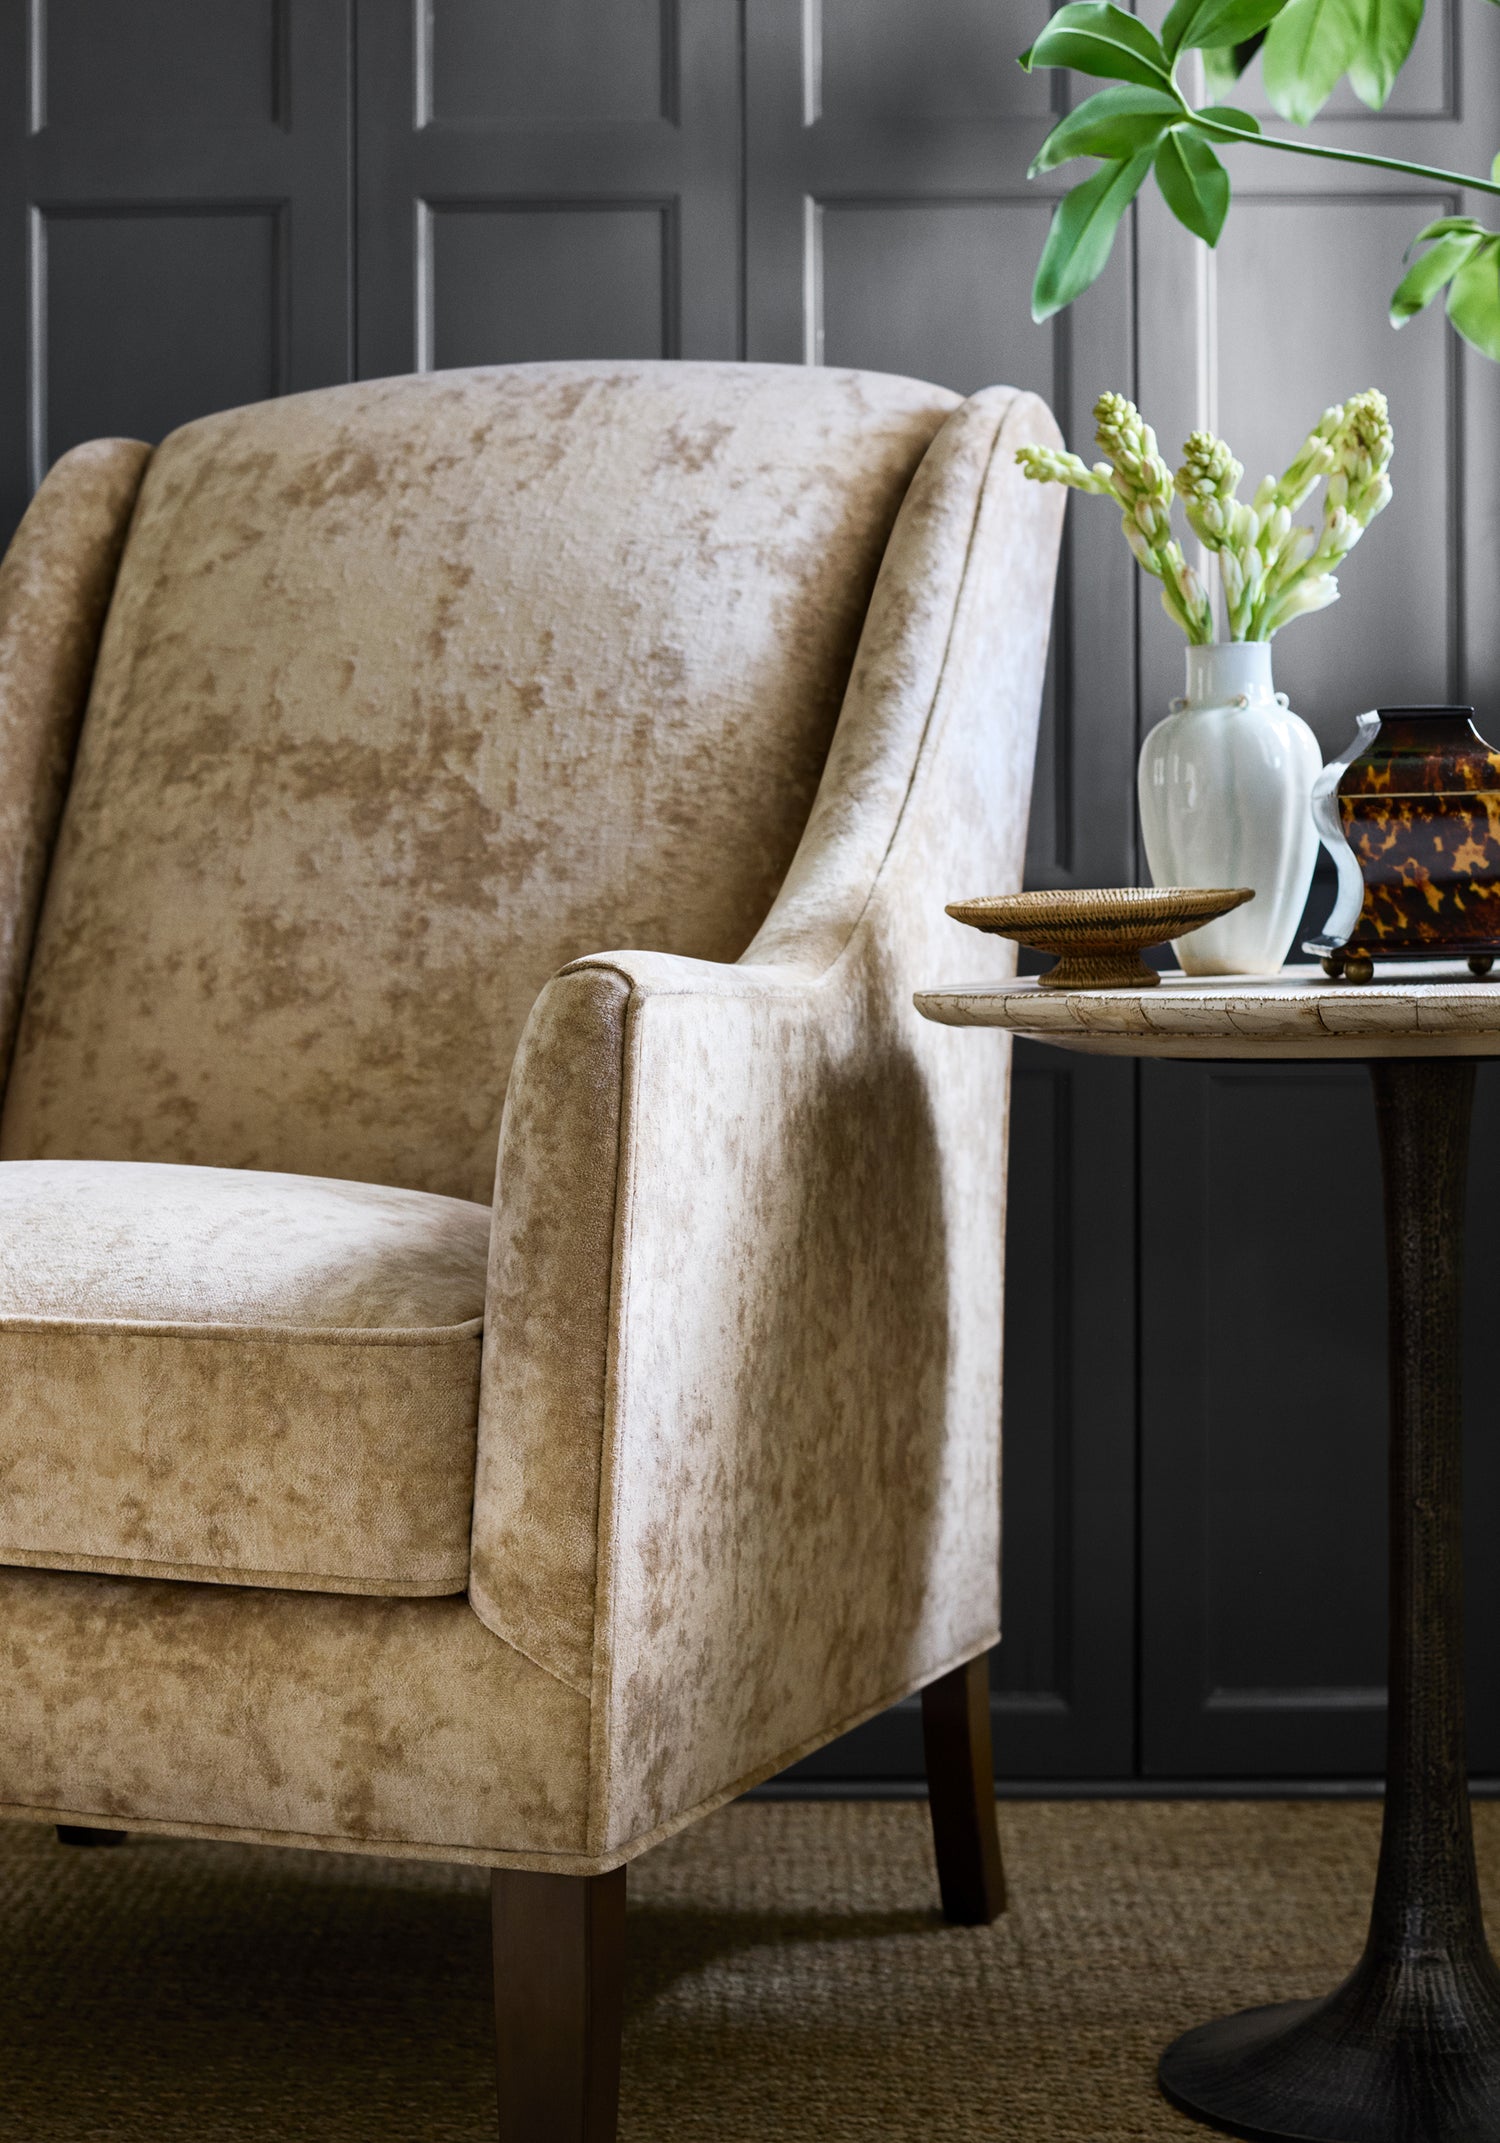 Wing chair in Celeste Velvet fabric in camel color - pattern number W8968 - by Thibaut in the Lyra Velvets collection